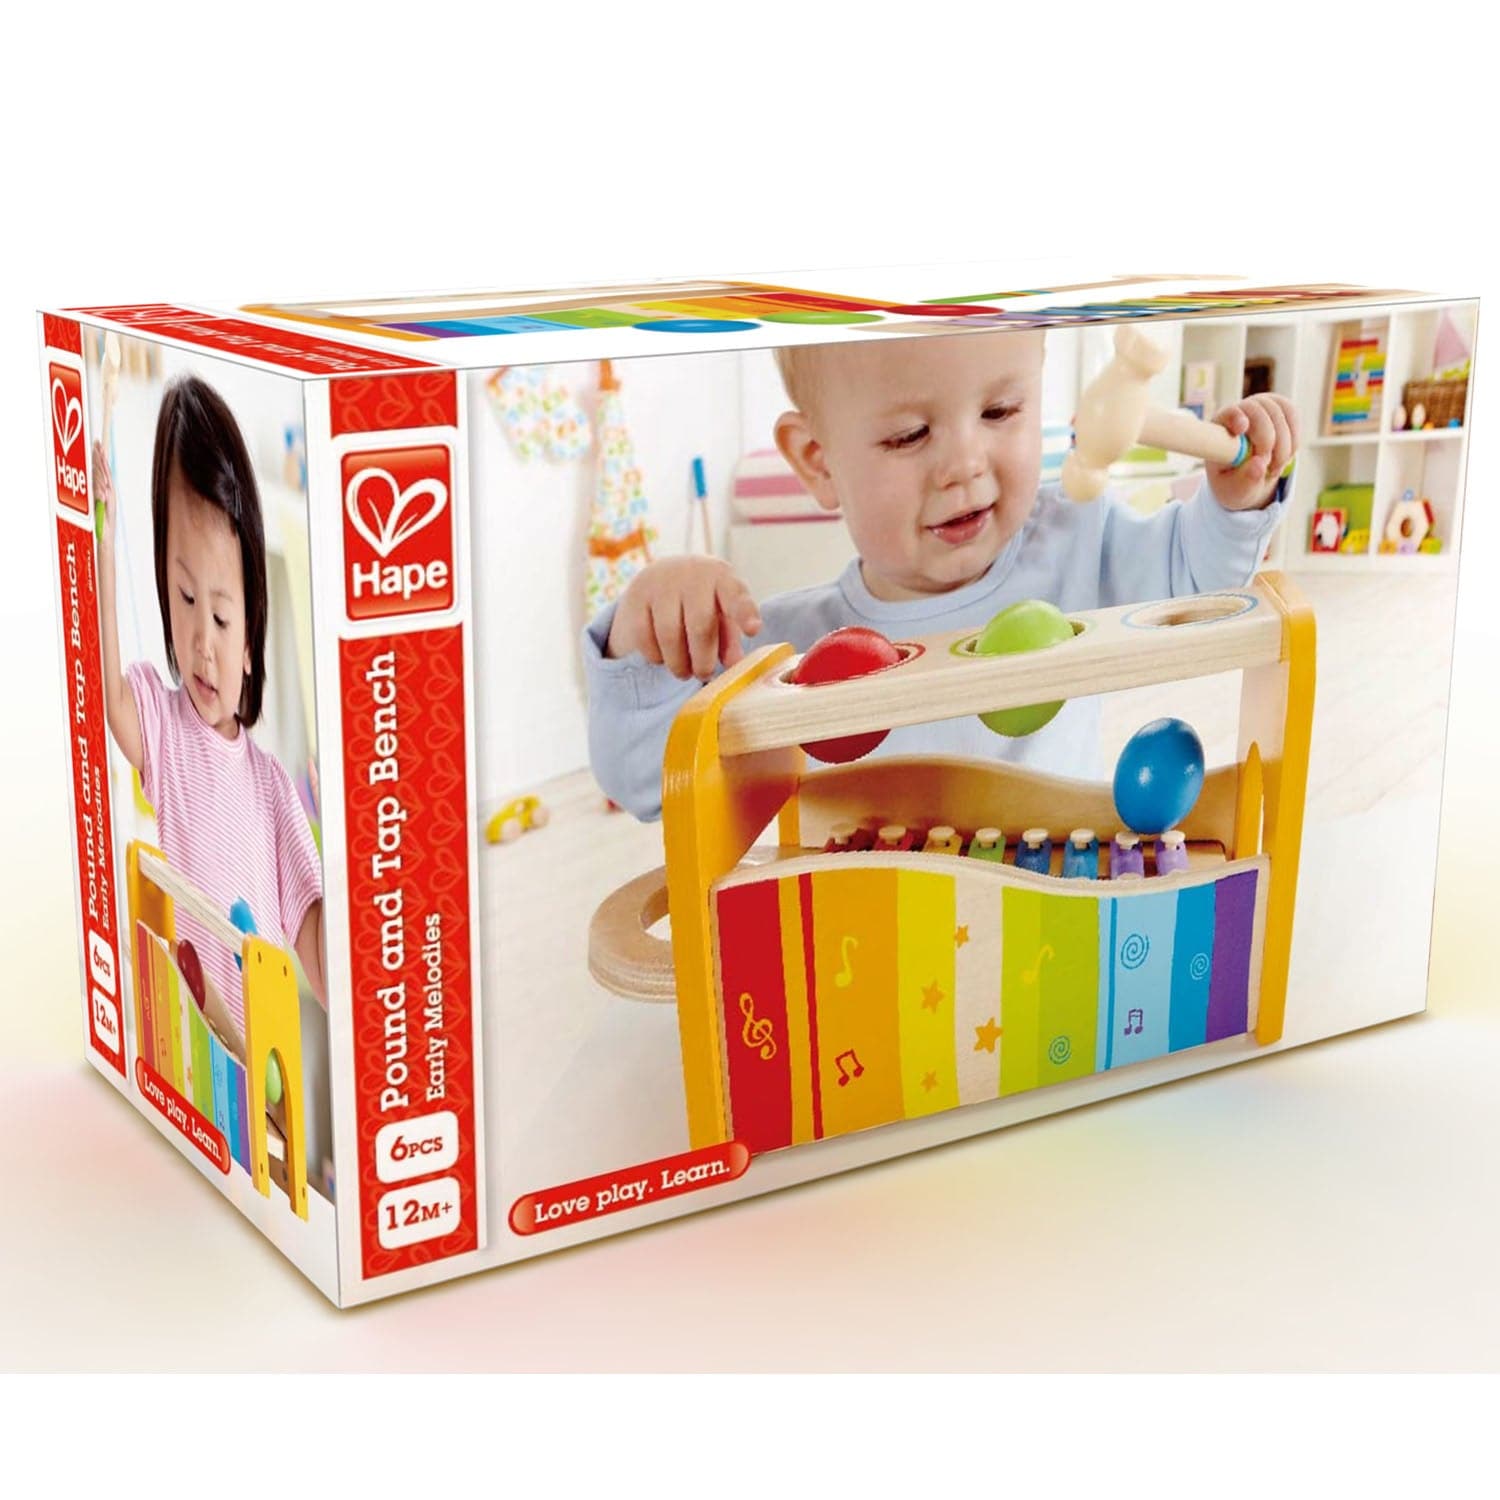 Hape-Pound and Tap Bench-E0305-Legacy Toys